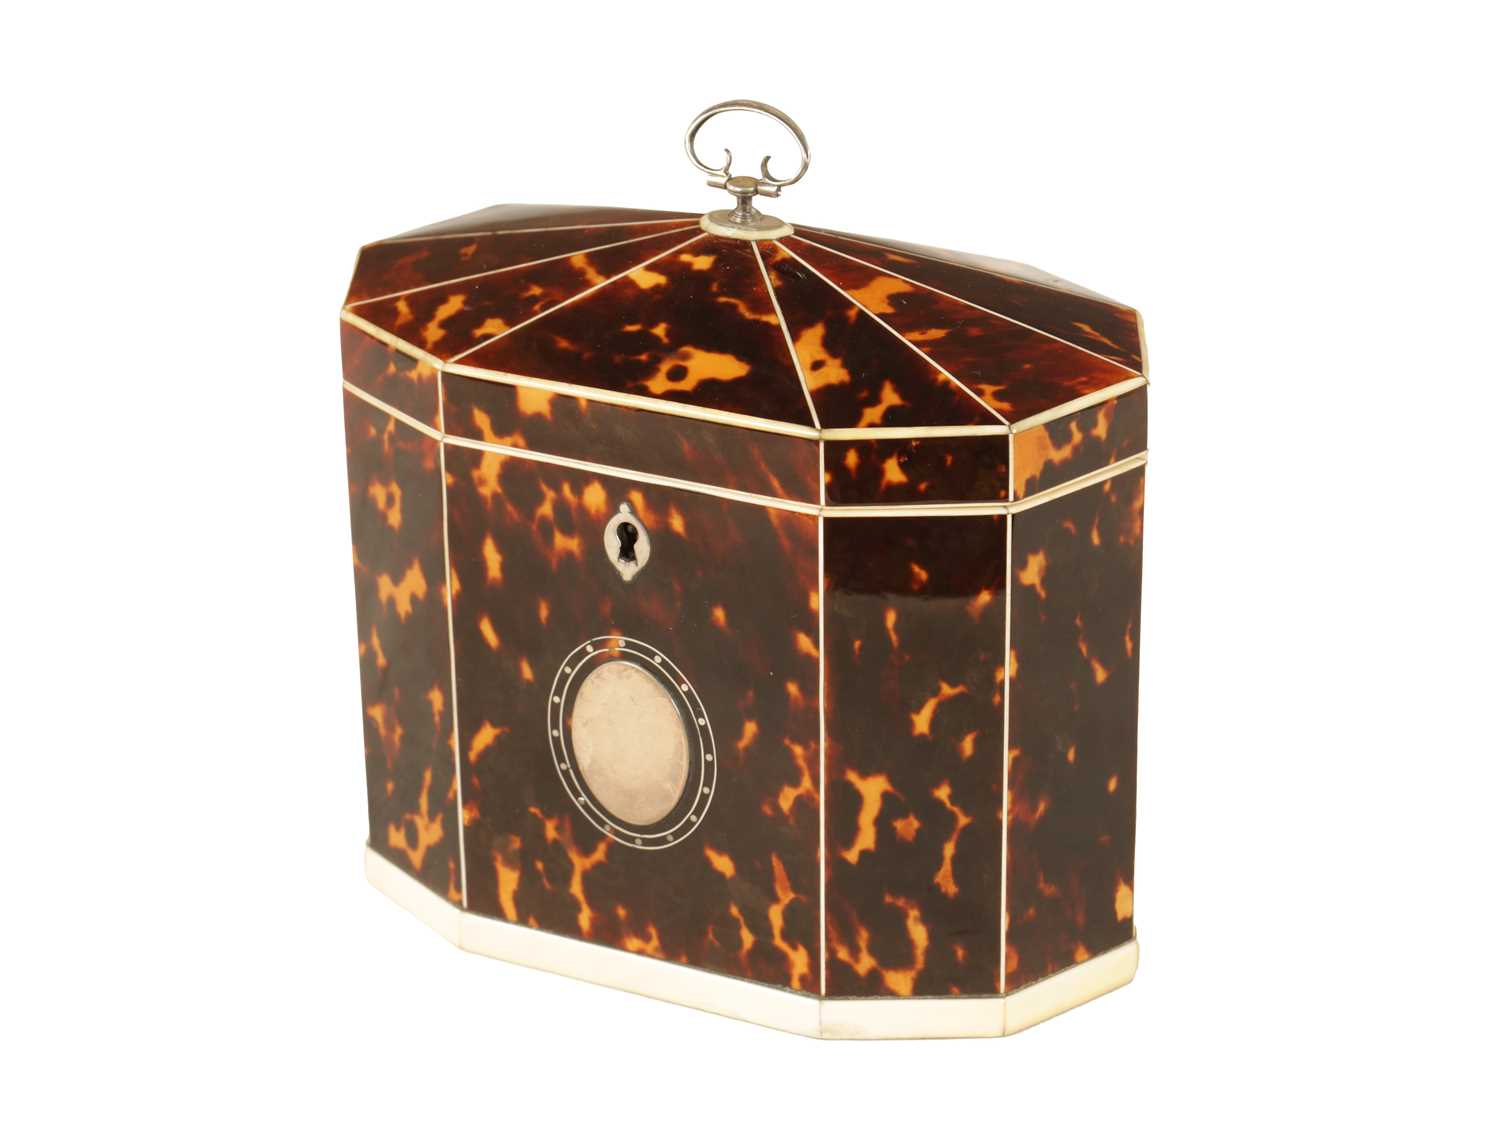 A FINE GEORGE III TORTOISHELL, IVORY AND SILVER MOUNTED TENT TOP TEA CADDY